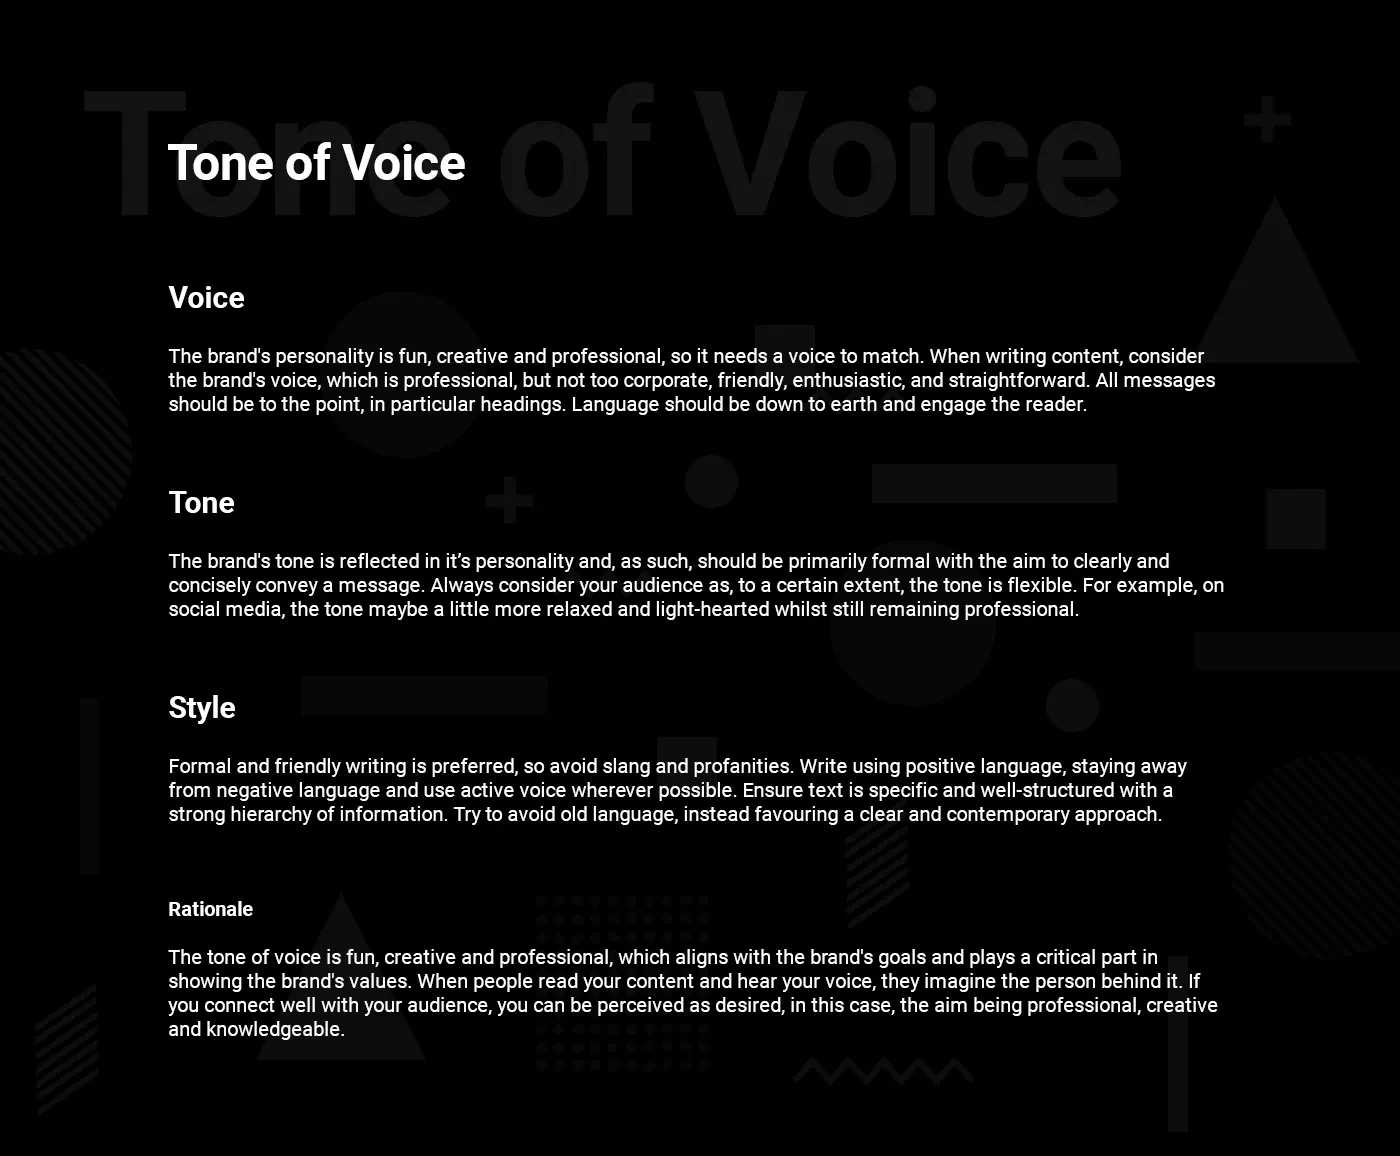 The tone of voice page describes how to write content in keeping with the brand’s style and values